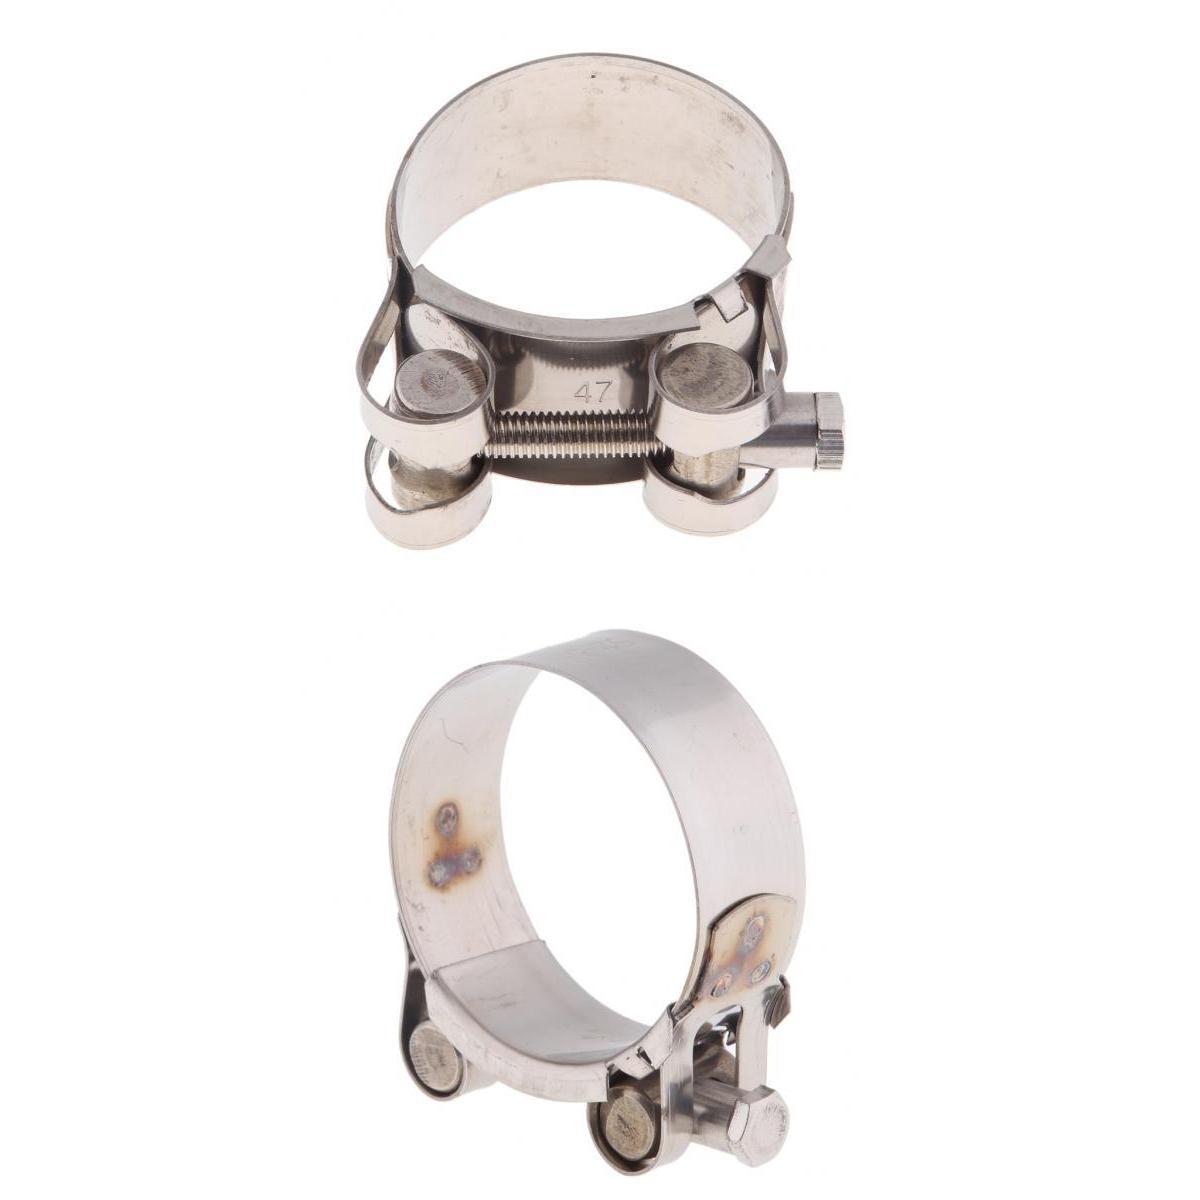 2 x Stainless Steel   Clamps Motorcycle Exhaust Clips O-Clamp